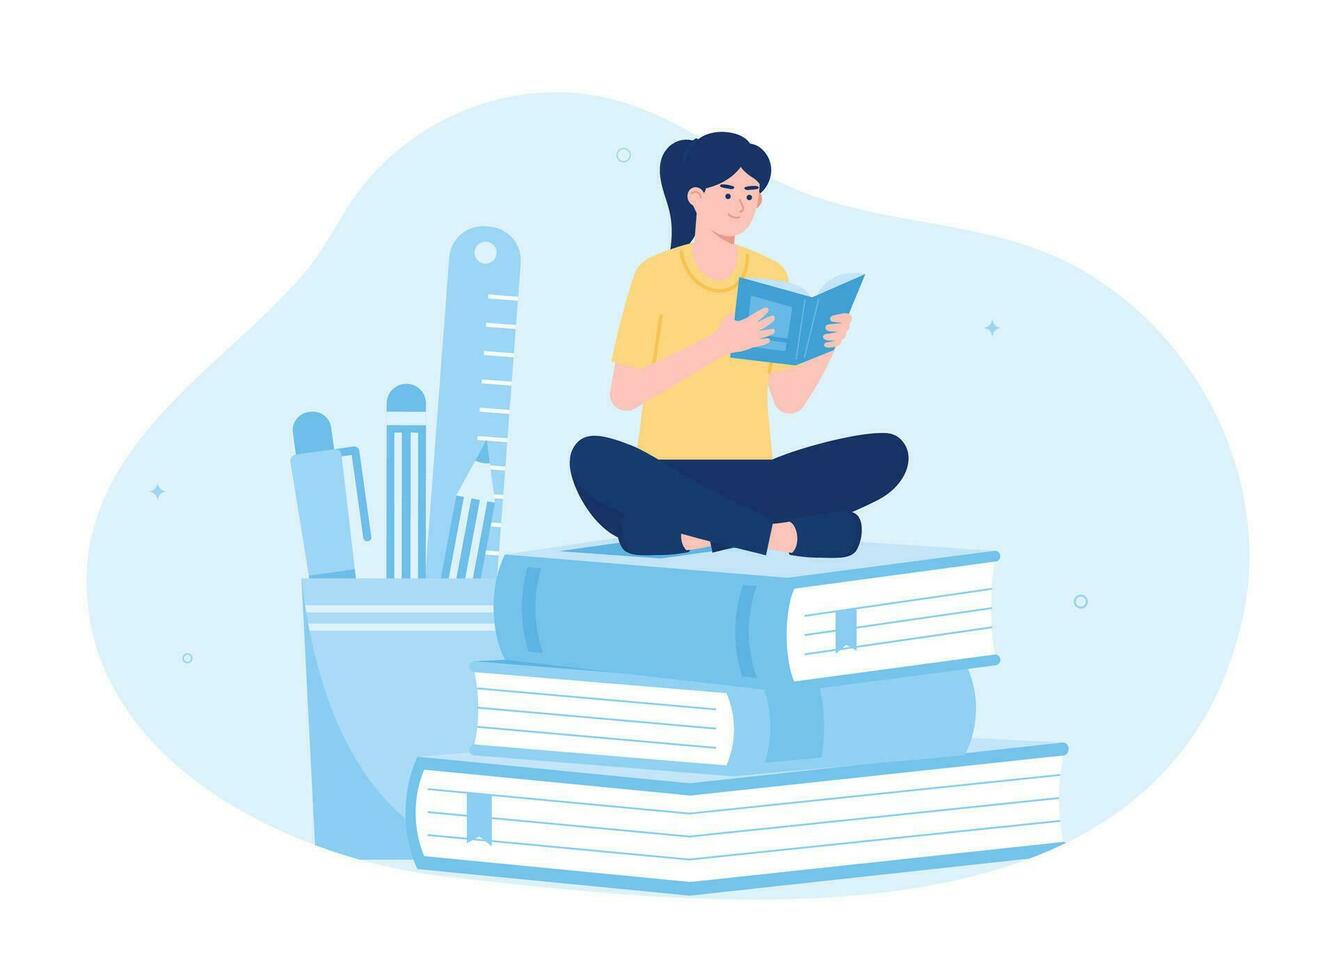 Female student sitting and reading a book concept flat illustration vector